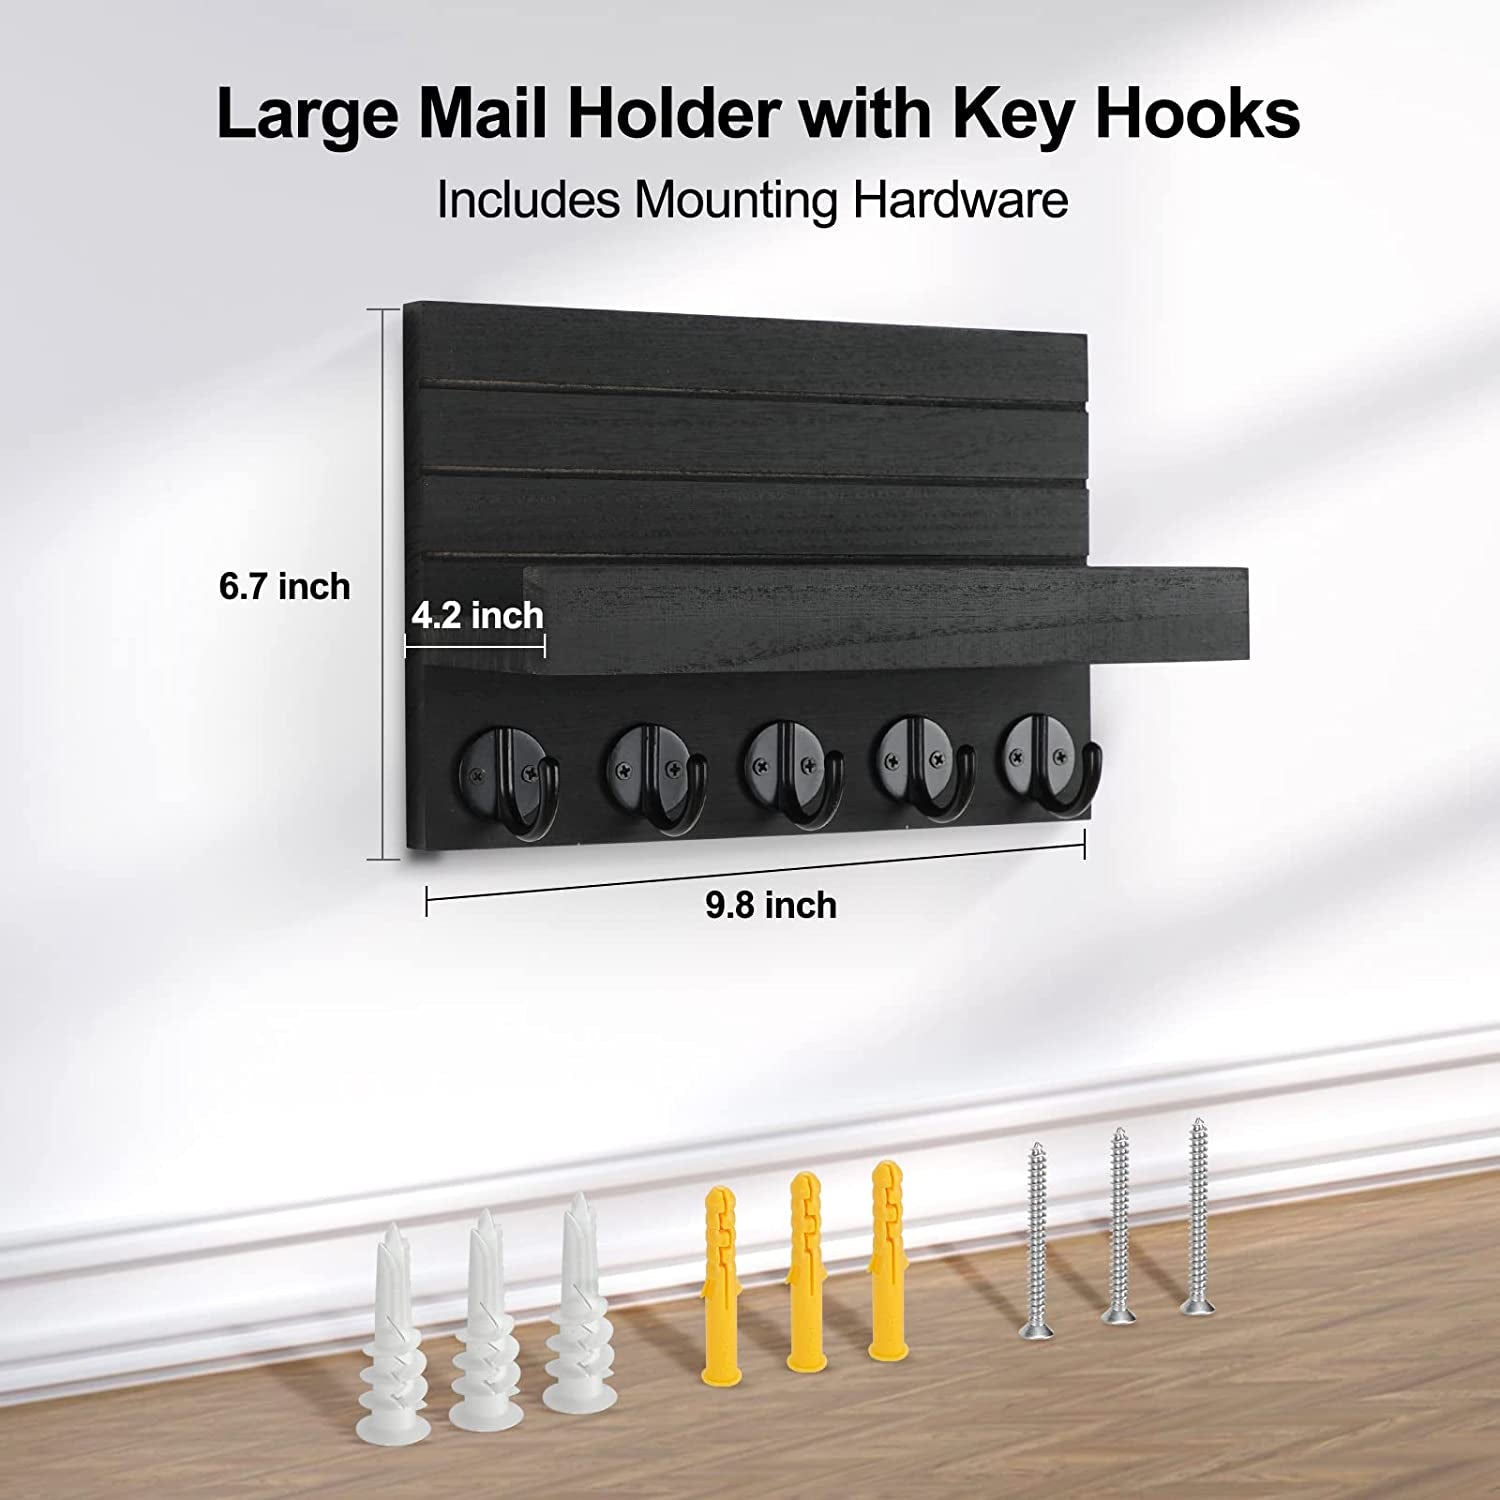 Key Holder for Wall, Decorative Key and Mail Holder with Shelf Has Large Key Hooks for Bags, Coats, Umbrella – Paulownia Wood Key Hanger with Mounting Hardware (9.8”W X 6.7”H X 4.2”D)